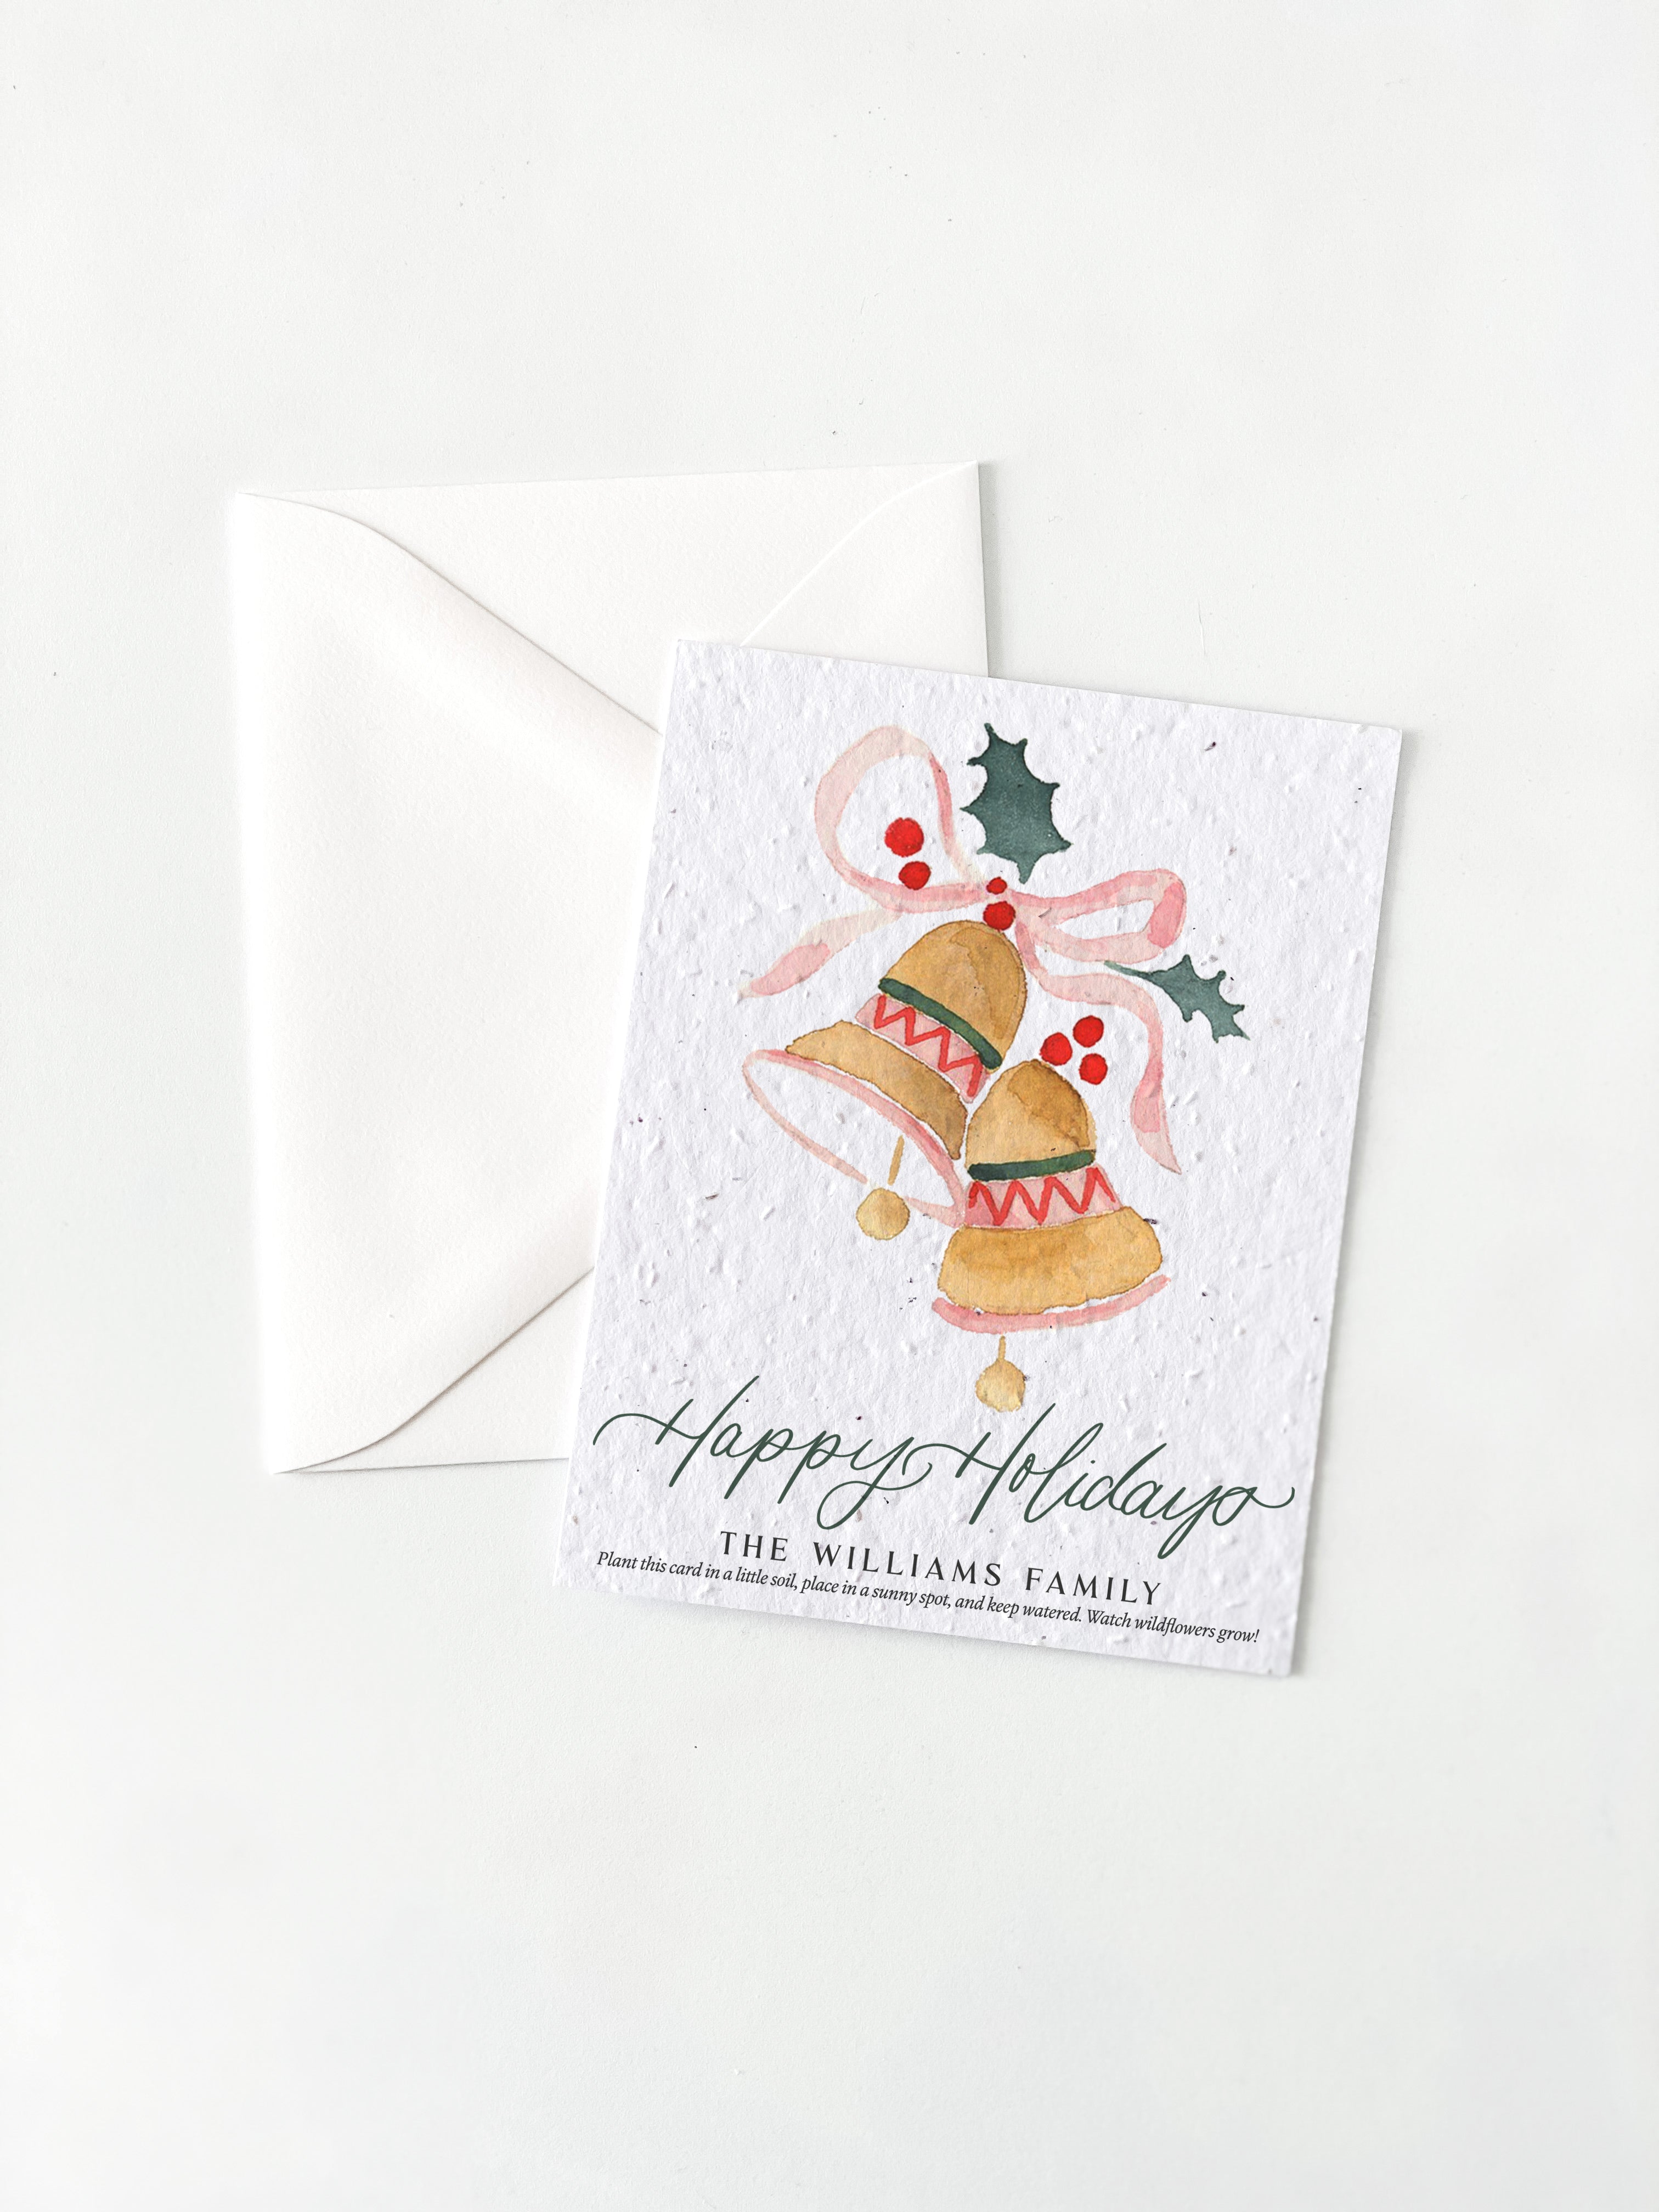 growNOTES™ Holiday Greeting Cards on Plantable Seed Paper - Christmas Bell